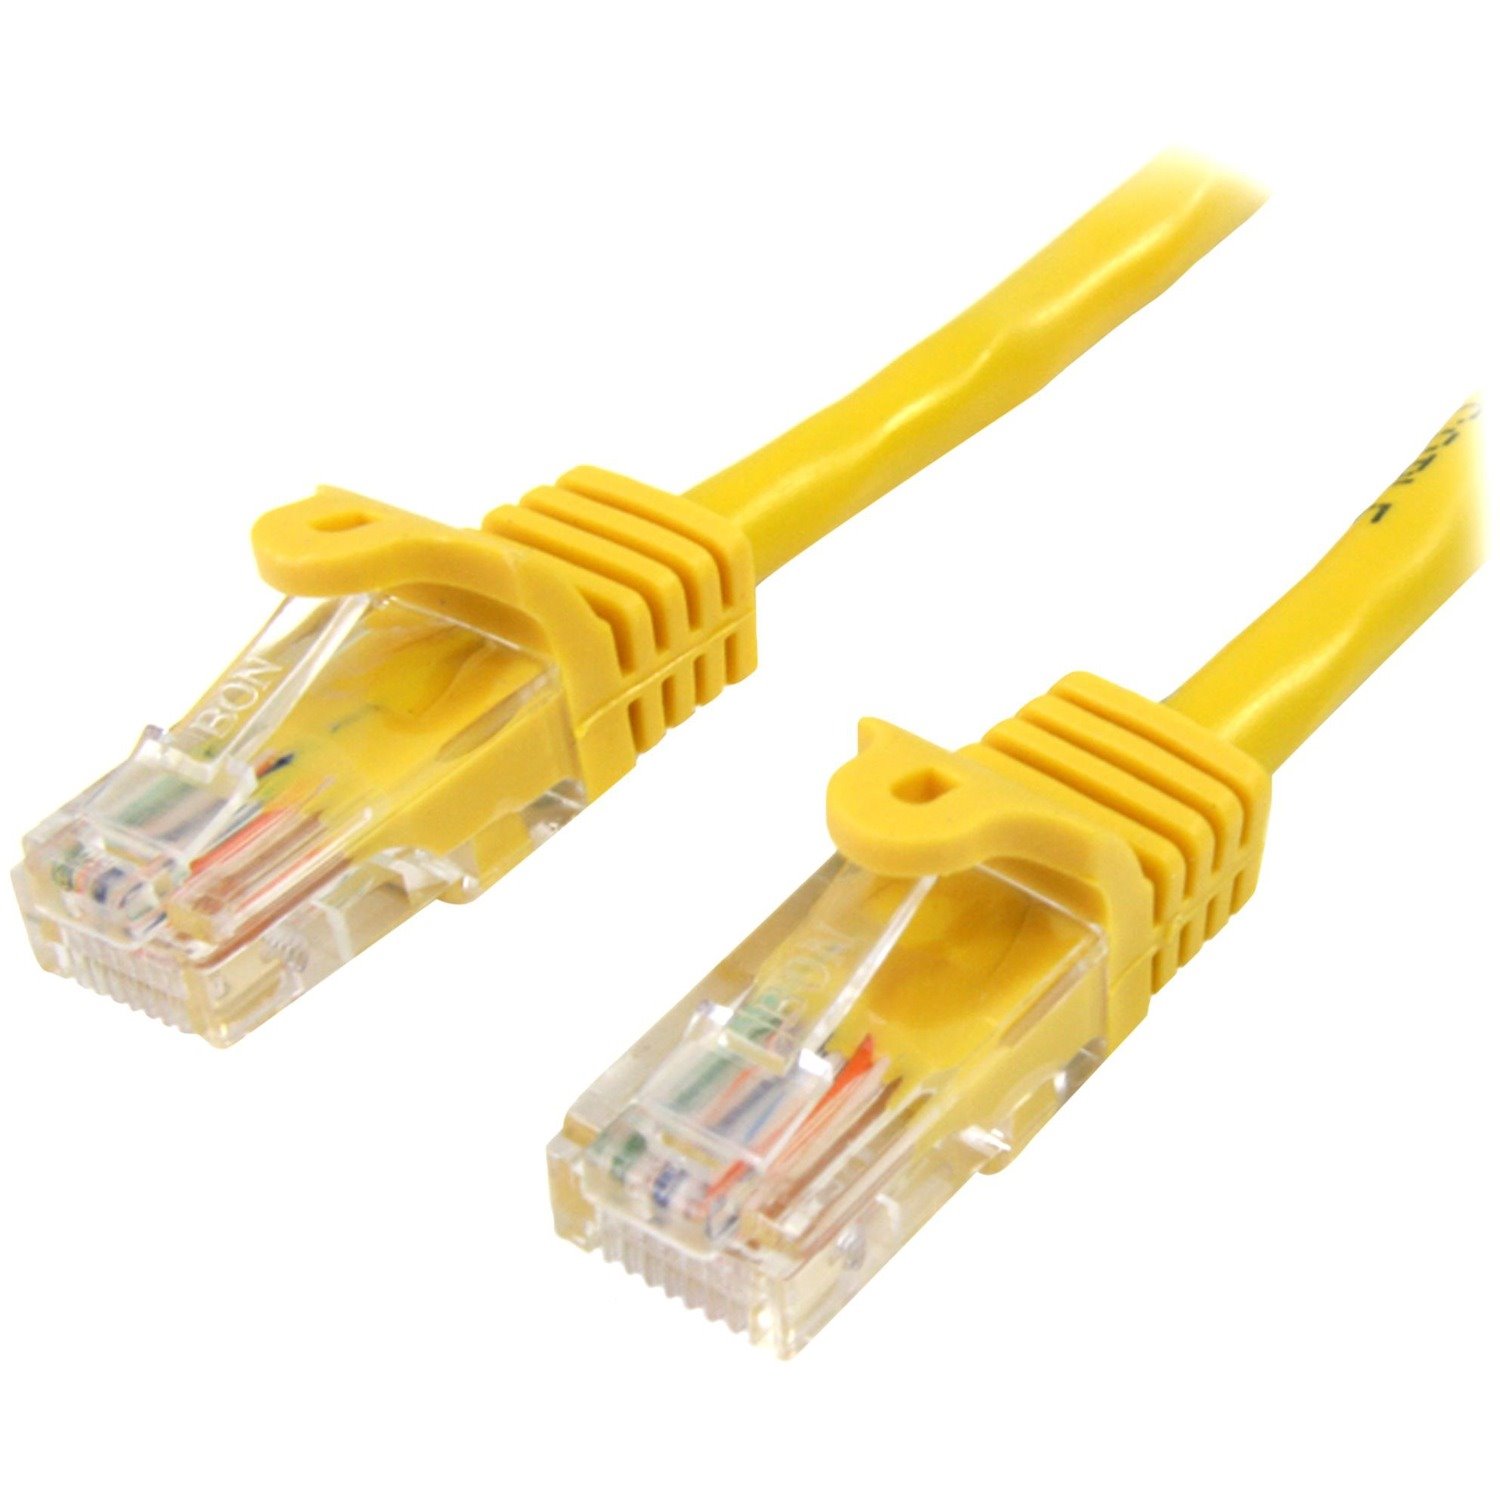 StarTech.com 3 m Yellow Cat5e Snagless RJ45 UTP Patch Cable - 3m Patch Cord - Ethernet Patch Cable - RJ45 Male to Male Cat 5e Cable